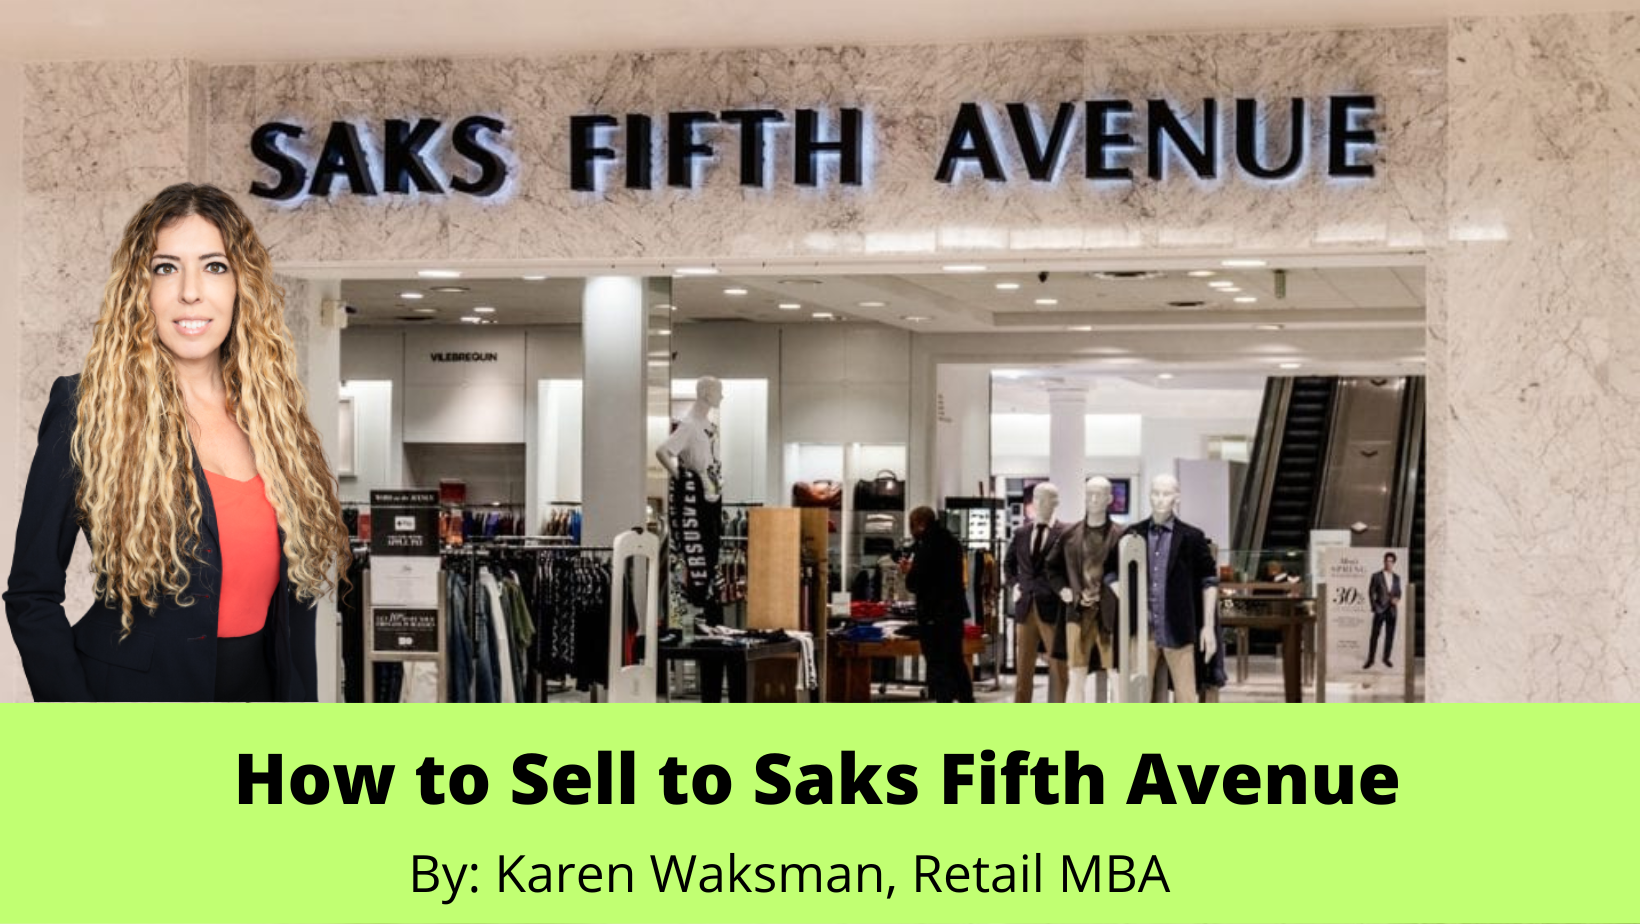 Saks Fifth Avenue Vendor - How to Sell to Saks Fifth Avenue